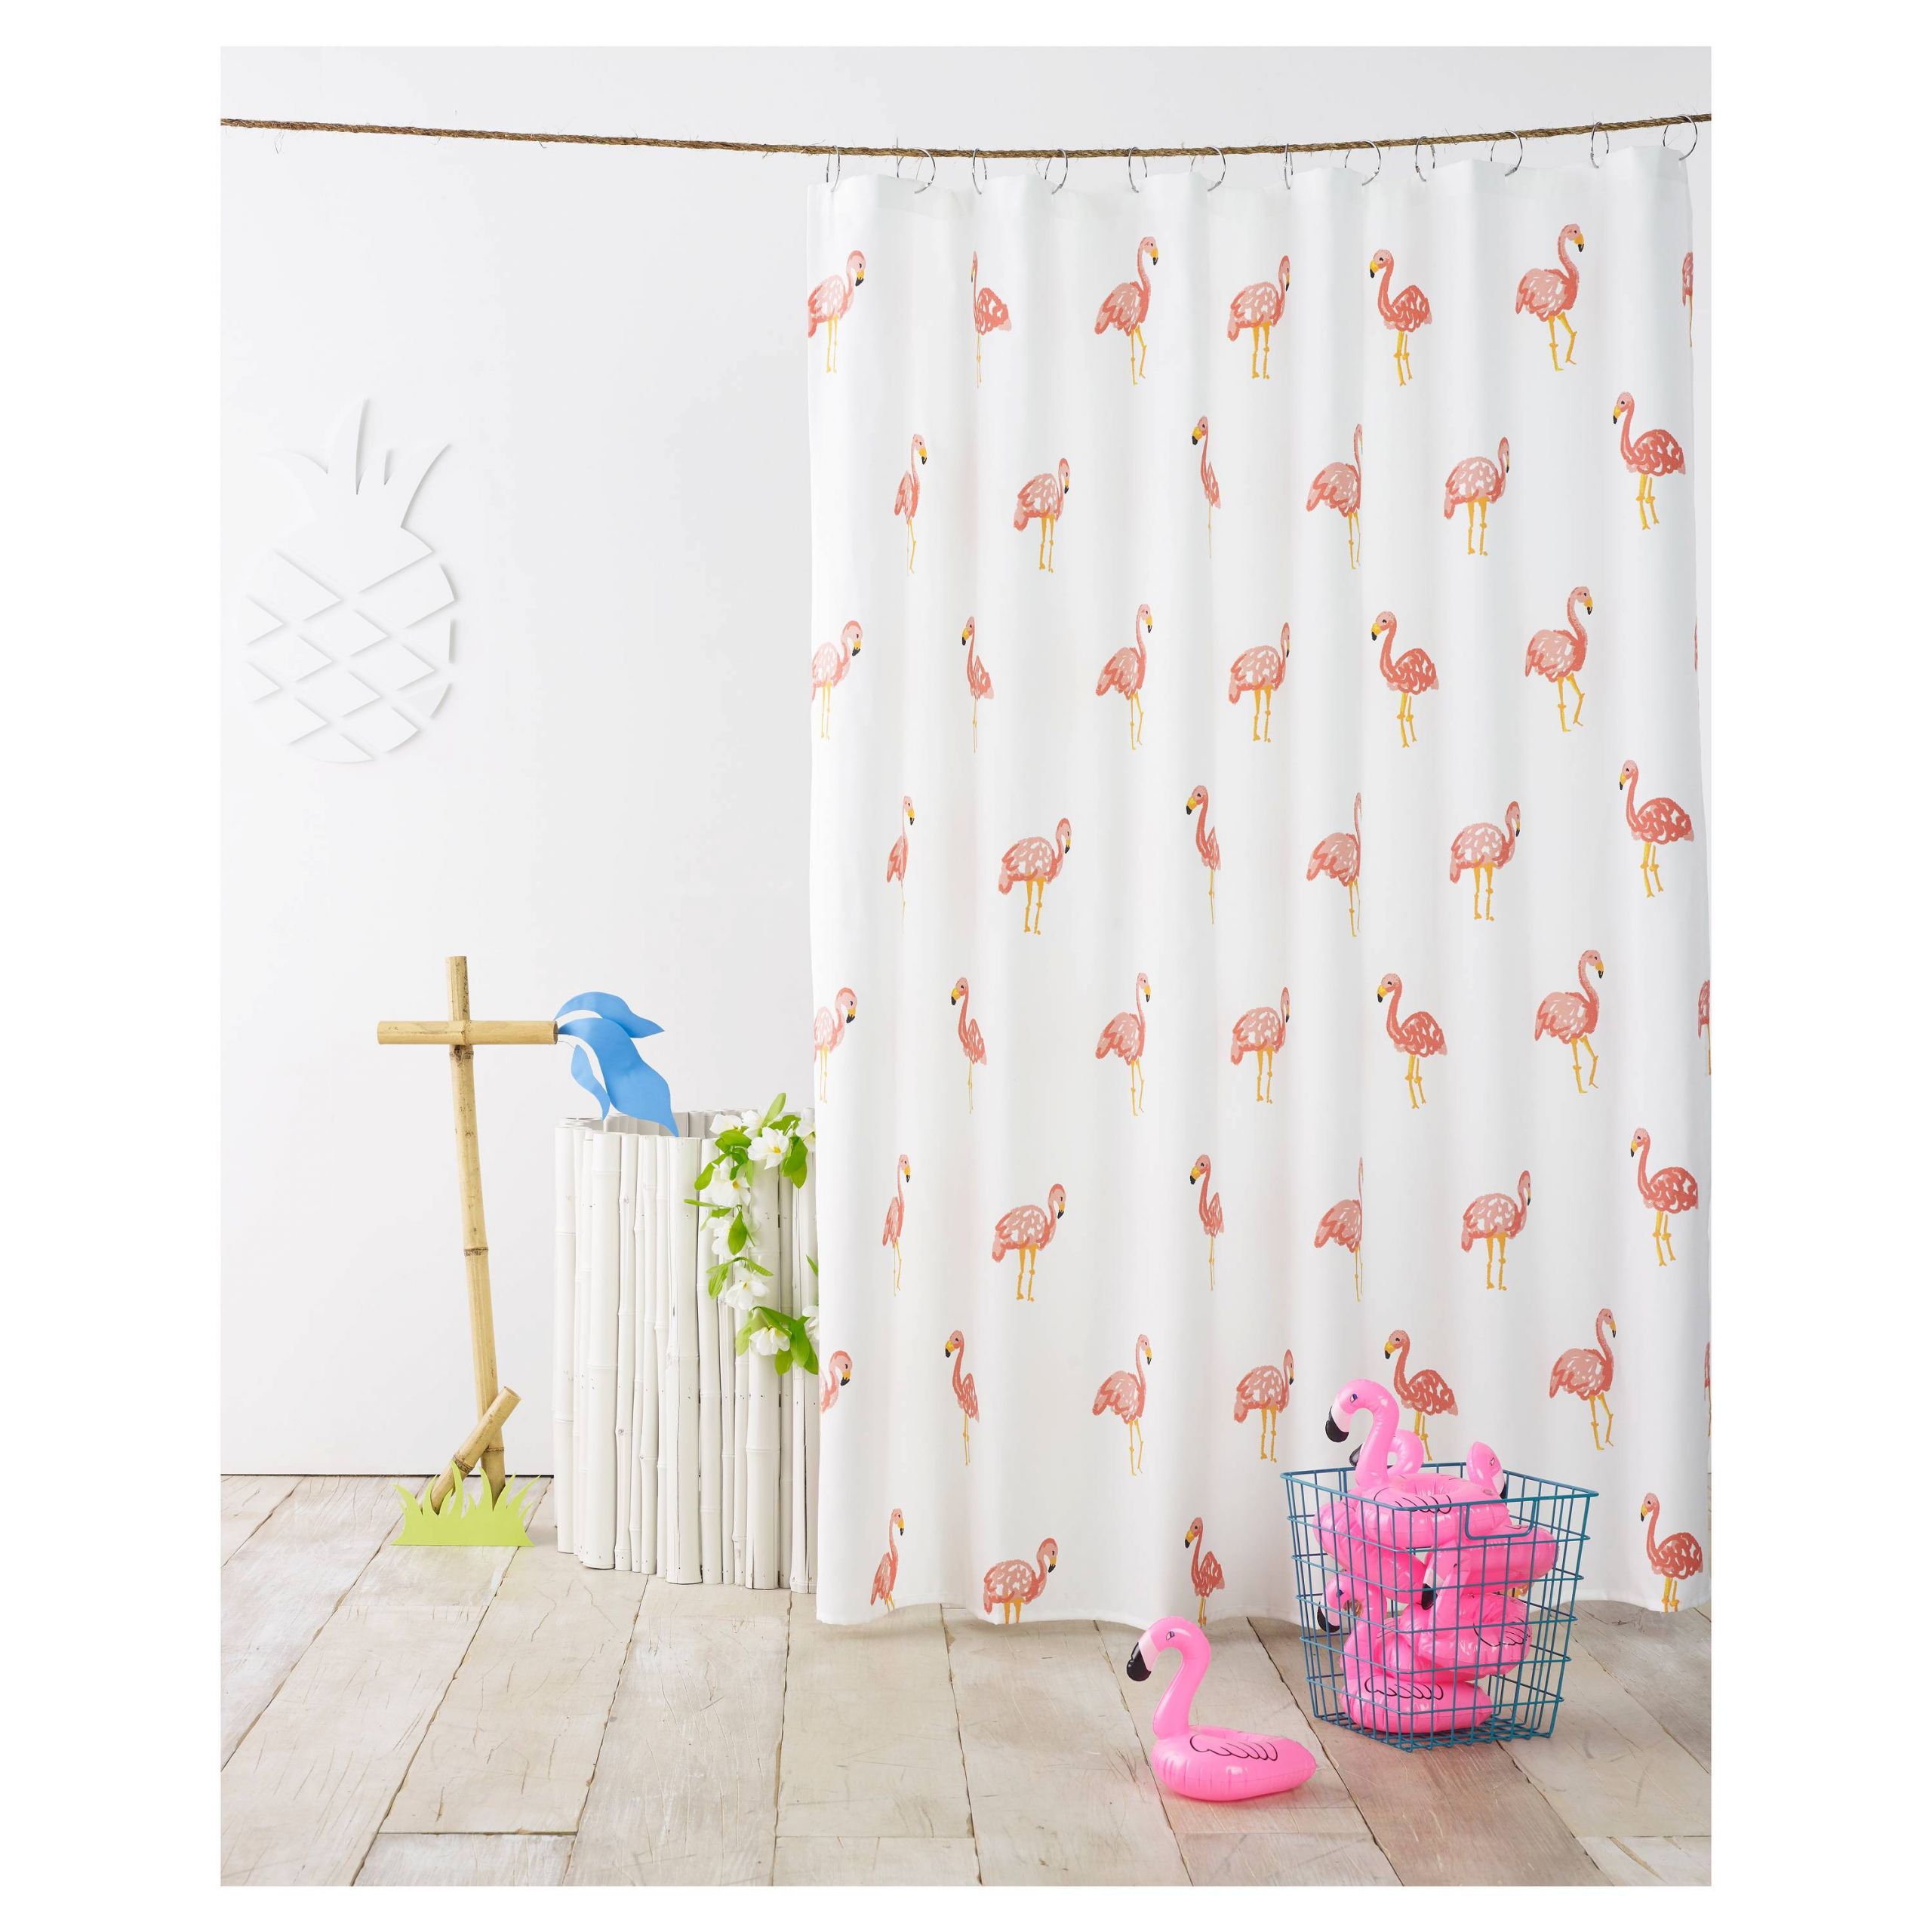 Target Kids Bathroom
 Our New Shower Curtain 10 Shower Curtains You Might Like